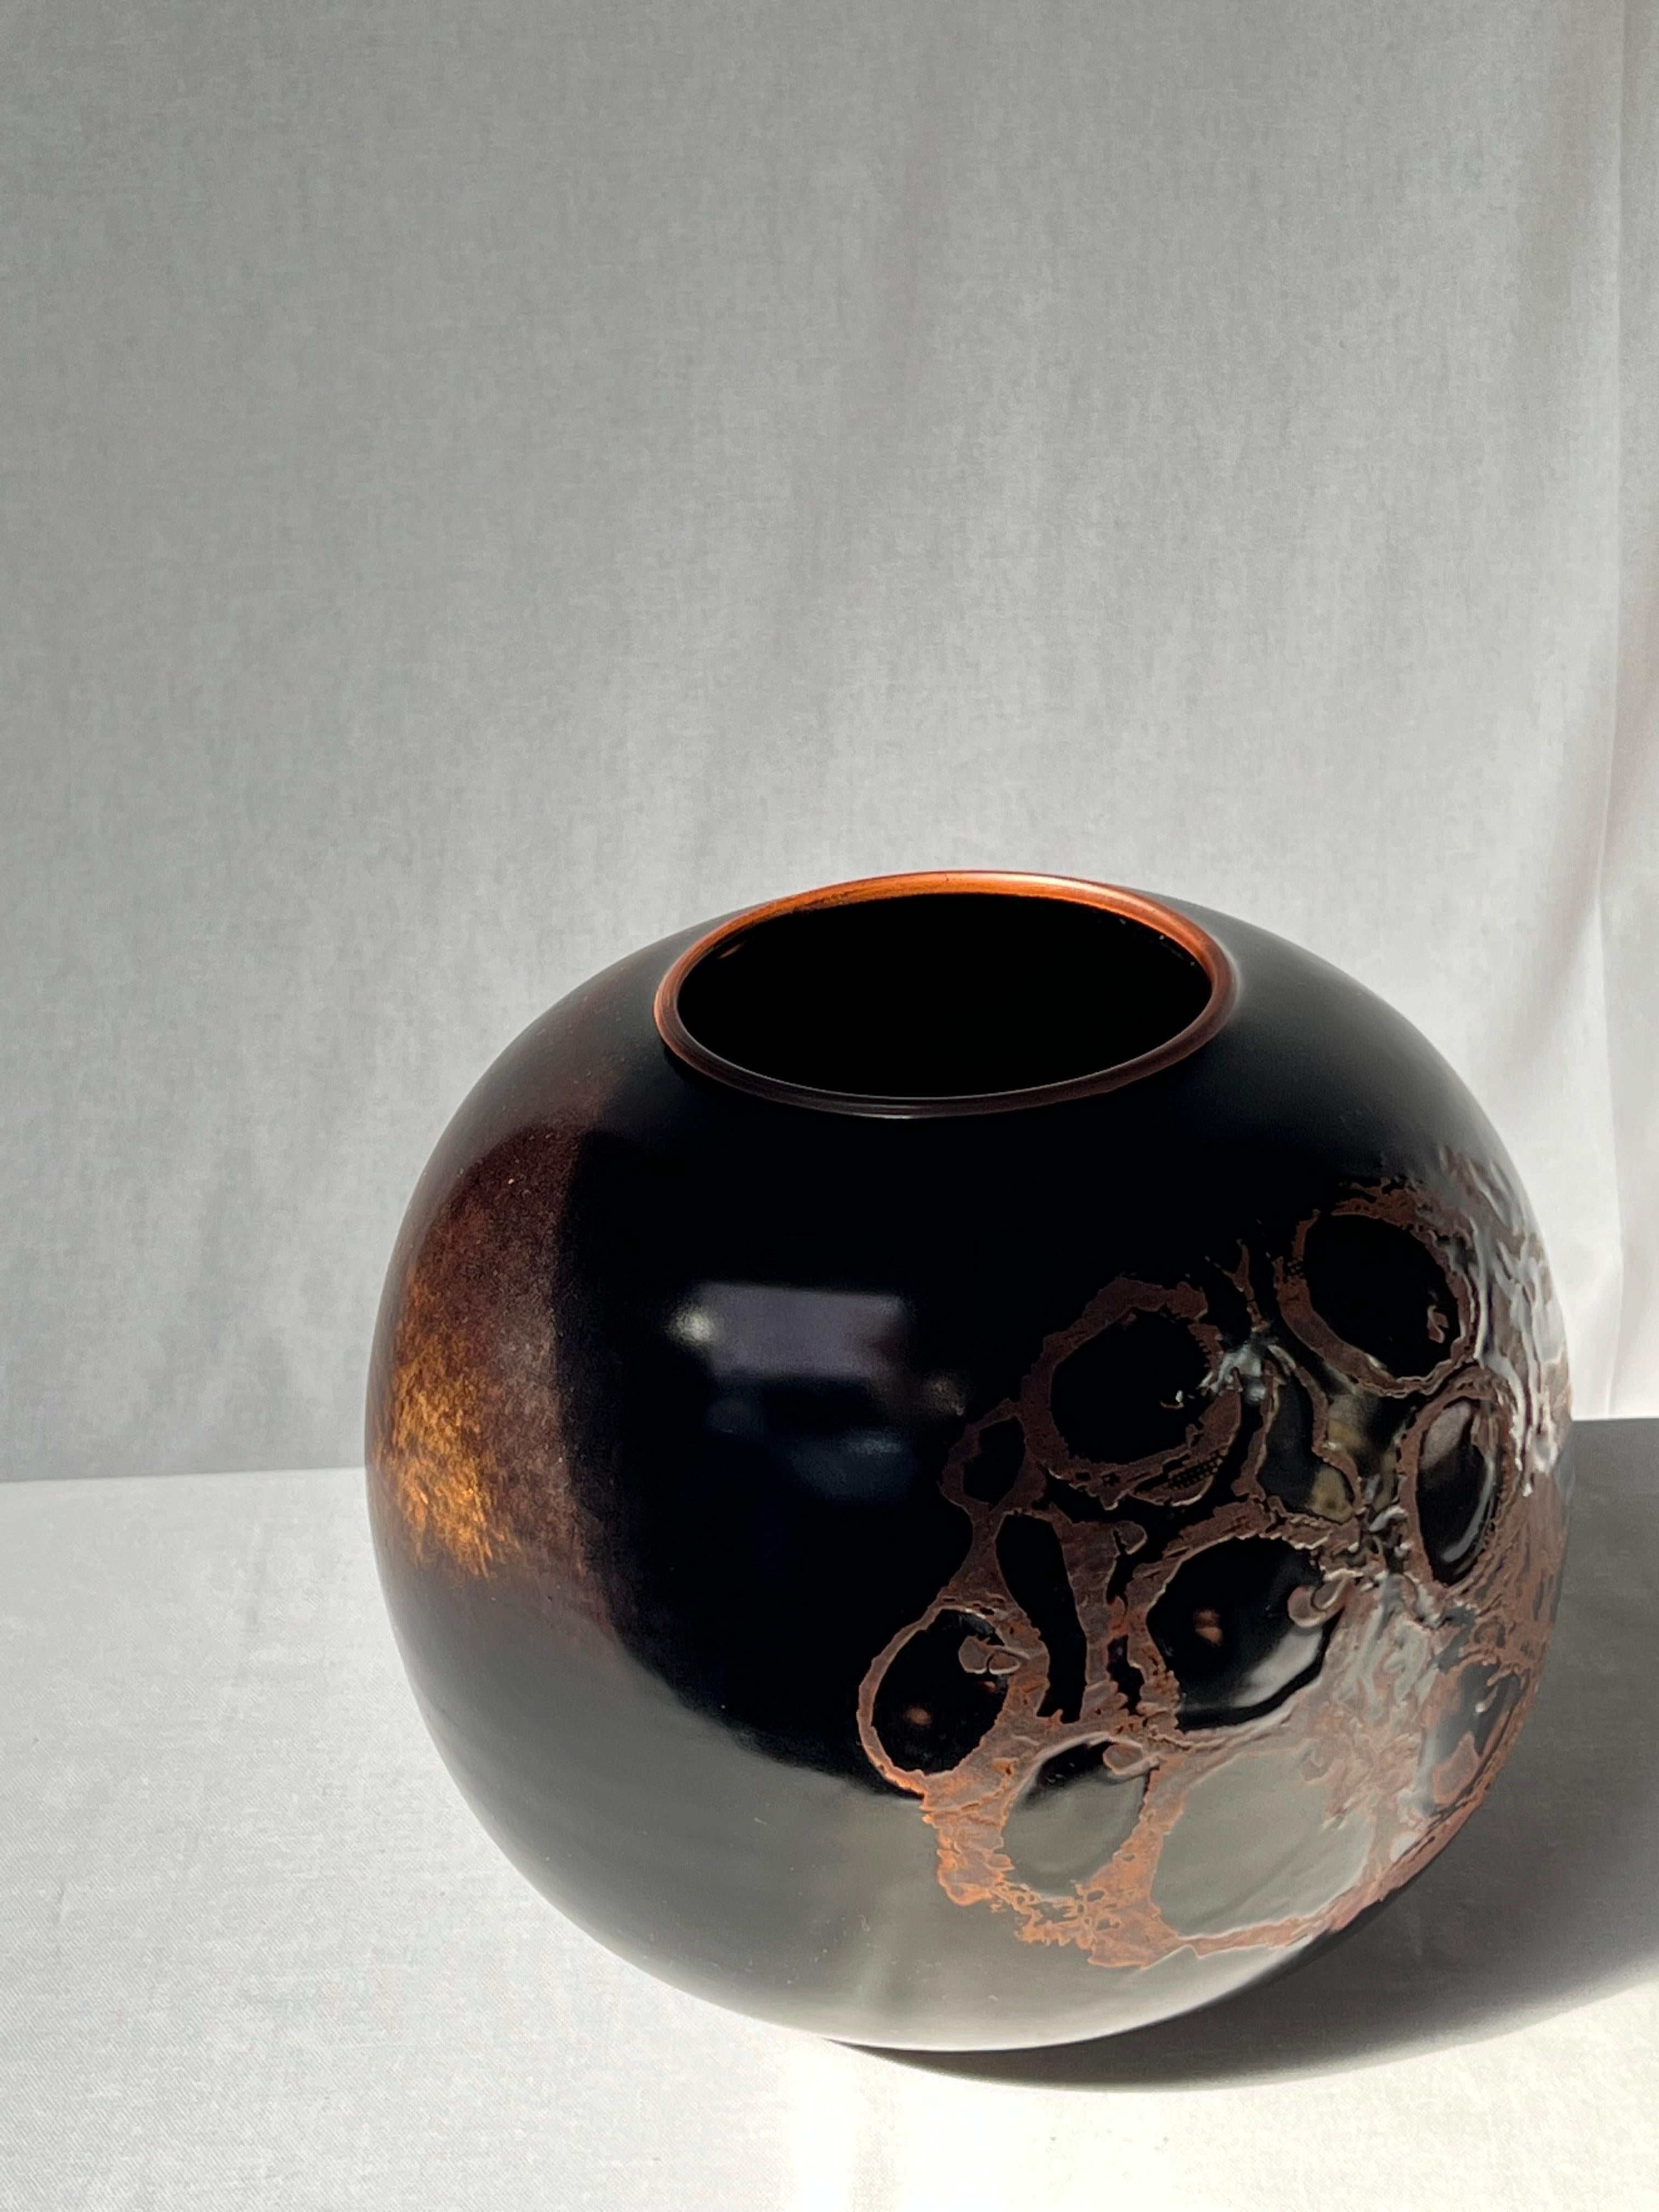 Black glazed vase by Swedish master ceramicist Stig Lindberg. From light brown on the edges to dark black. It is the Japanese tenmoku glaze also used by the ancient Chinese. Elegant details and nice pattern. Unique piece made by hand and signed by